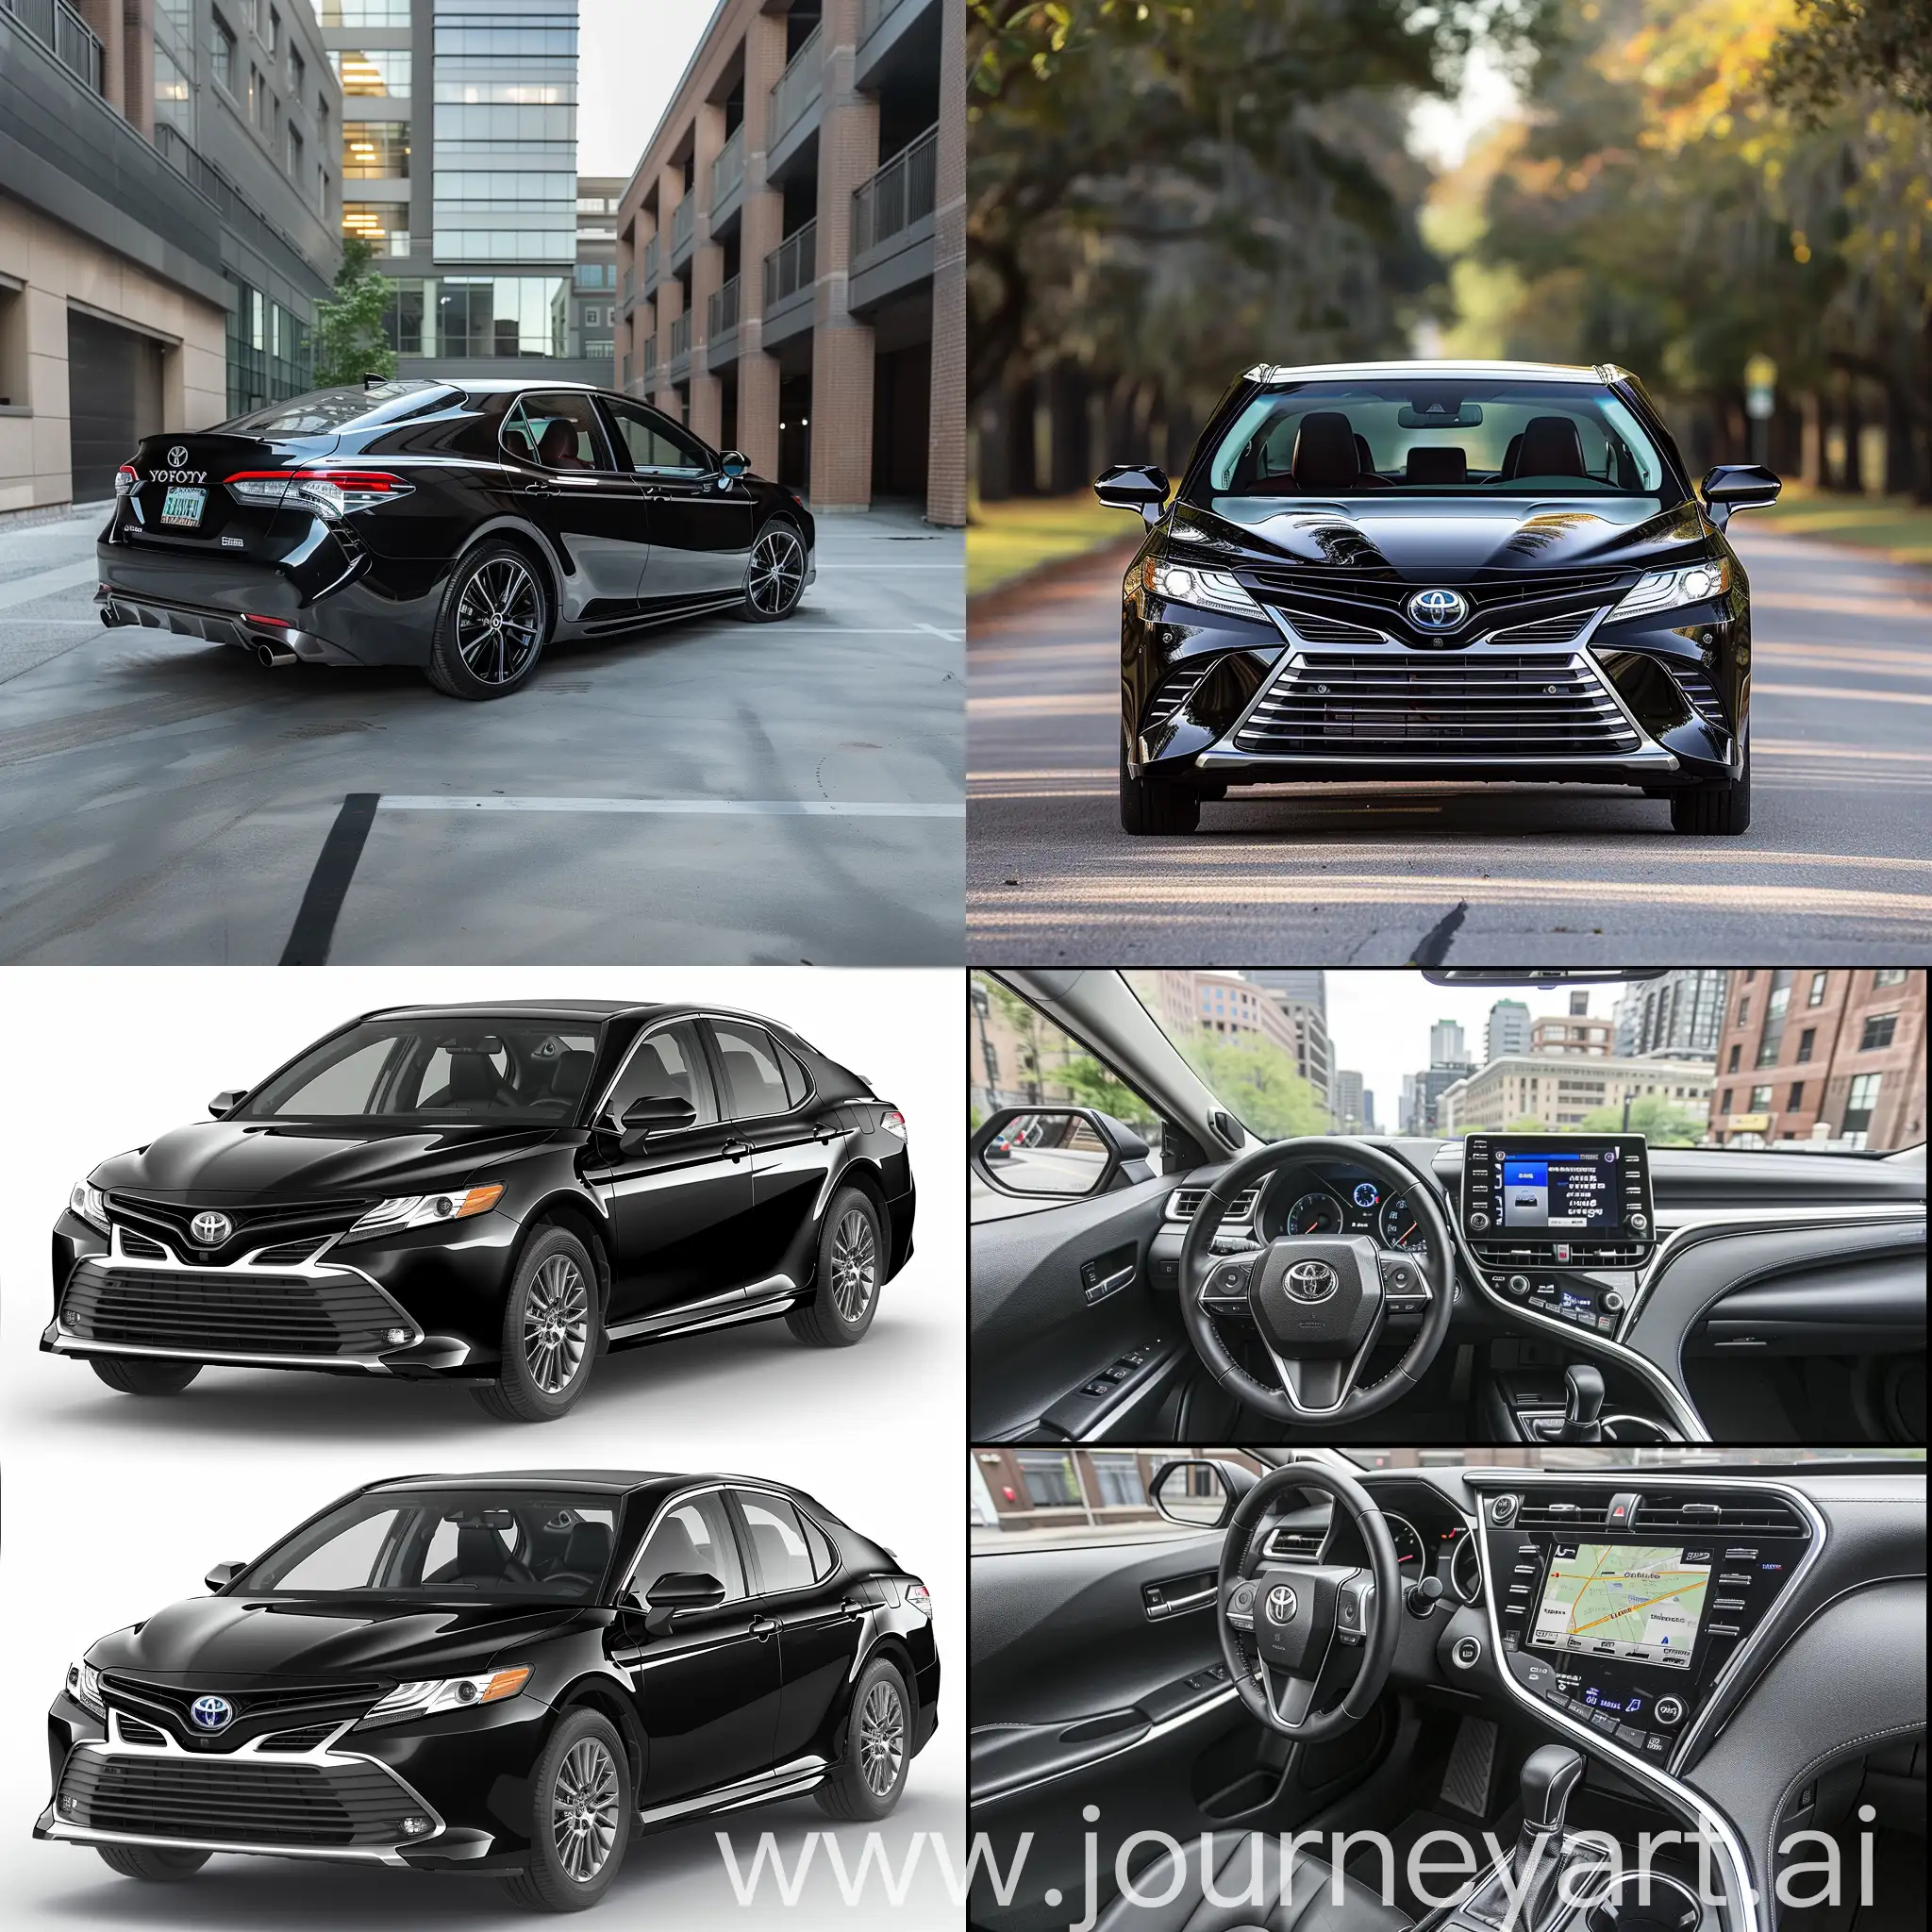 2017-Toyota-Camry-Black-Sedan-with-25L-Engine-Front-View